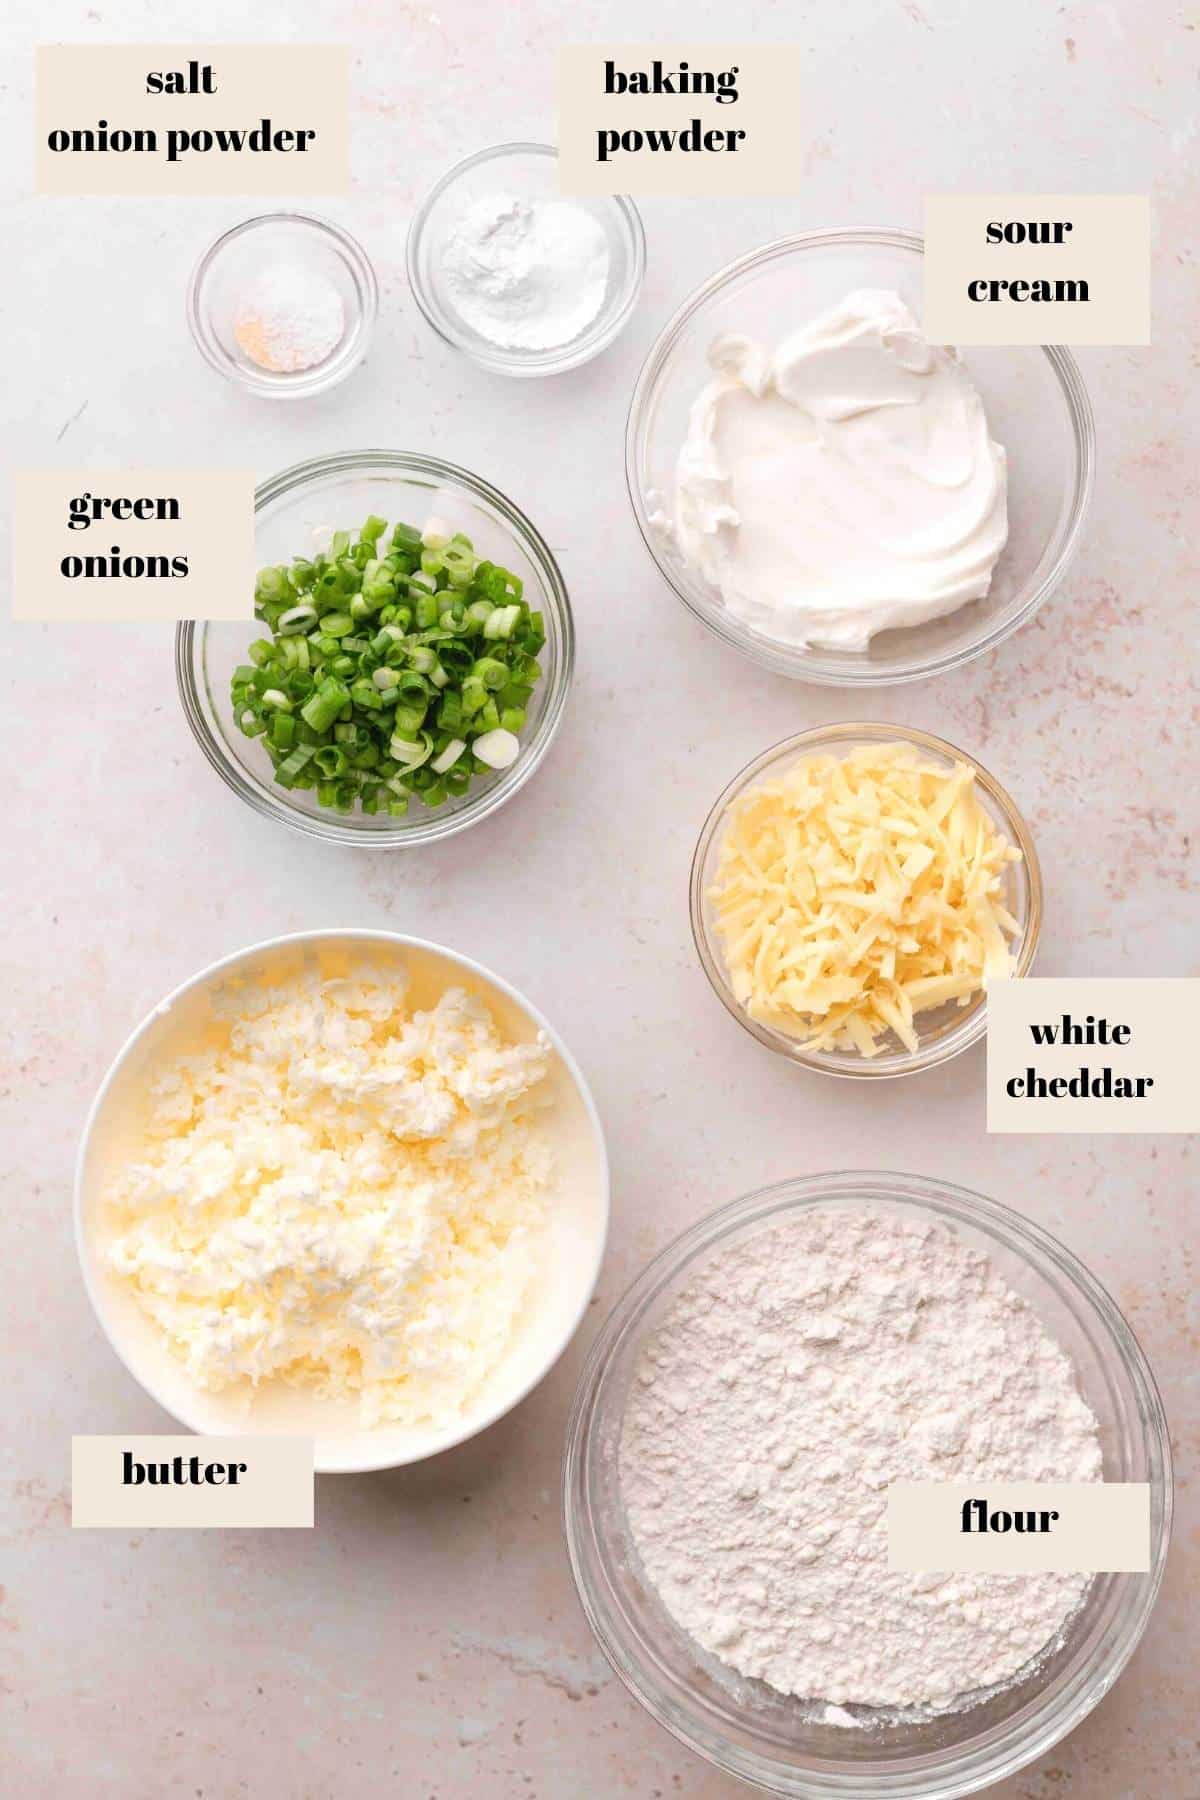 ingredients needed to make the sour cream biscuits.